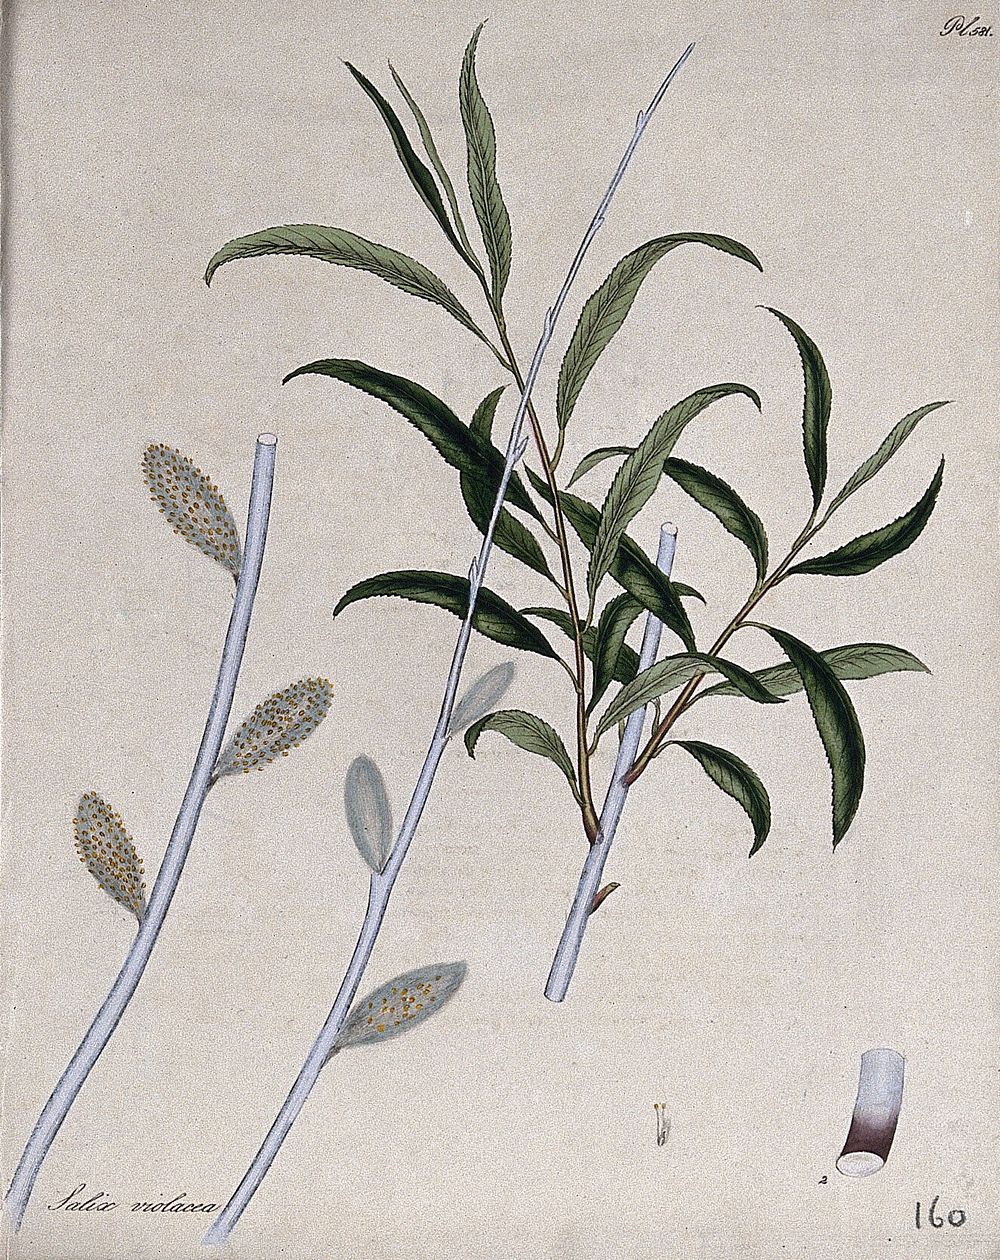 A willow (Salix violacea): leafy and flowering branches with floral segments. Coloured engraving, c. 1804, after H. Andrews.